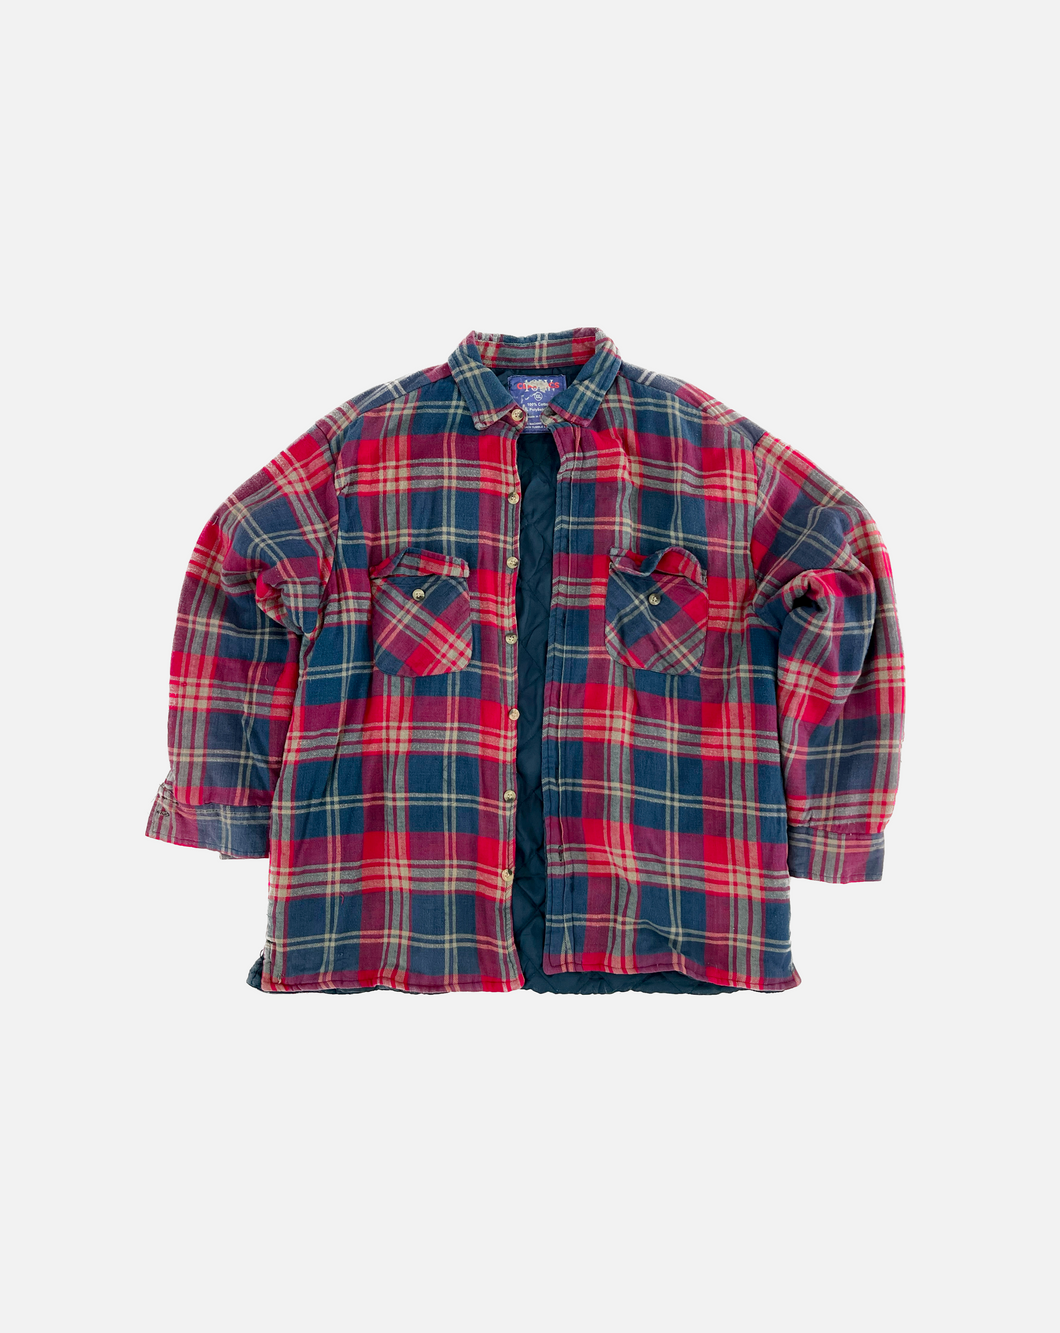 Distressed Flannel Shirt